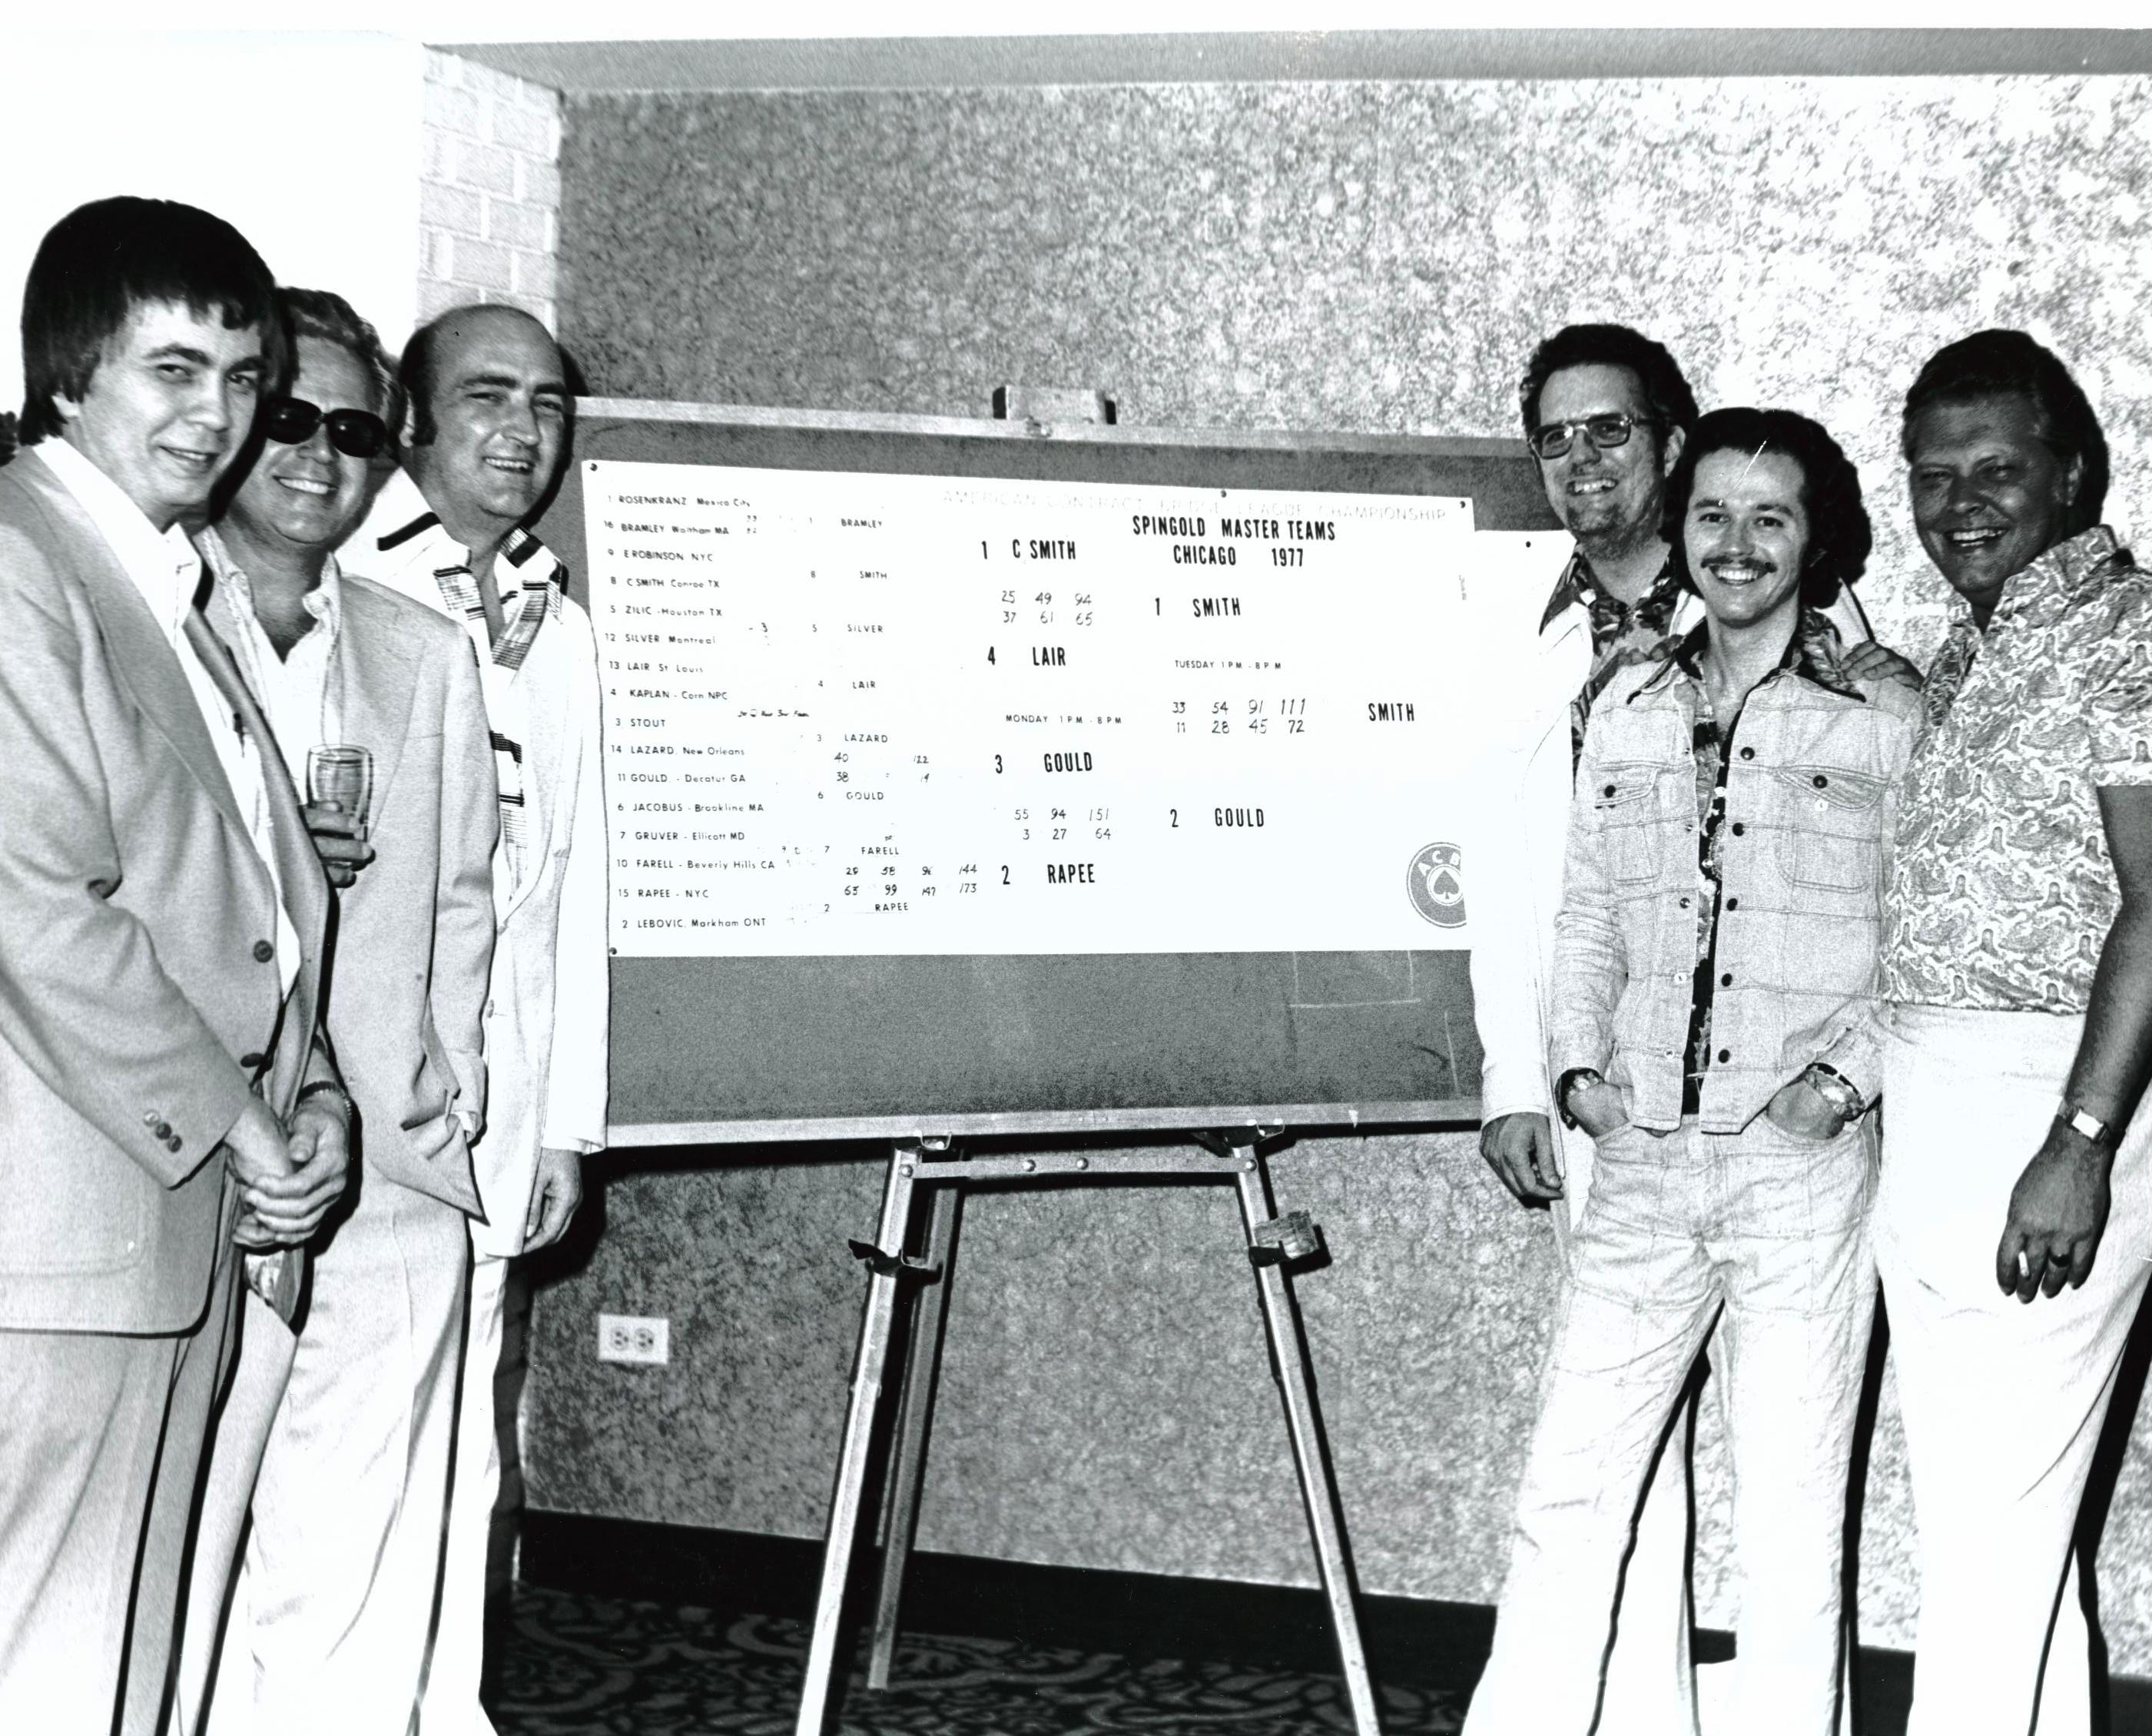 1977 Spingold winners. L to r: Lou Bluhm, Cliff Russell, Tommy Sanders, Dan Morse, Eddie Wold and Curtis Smith